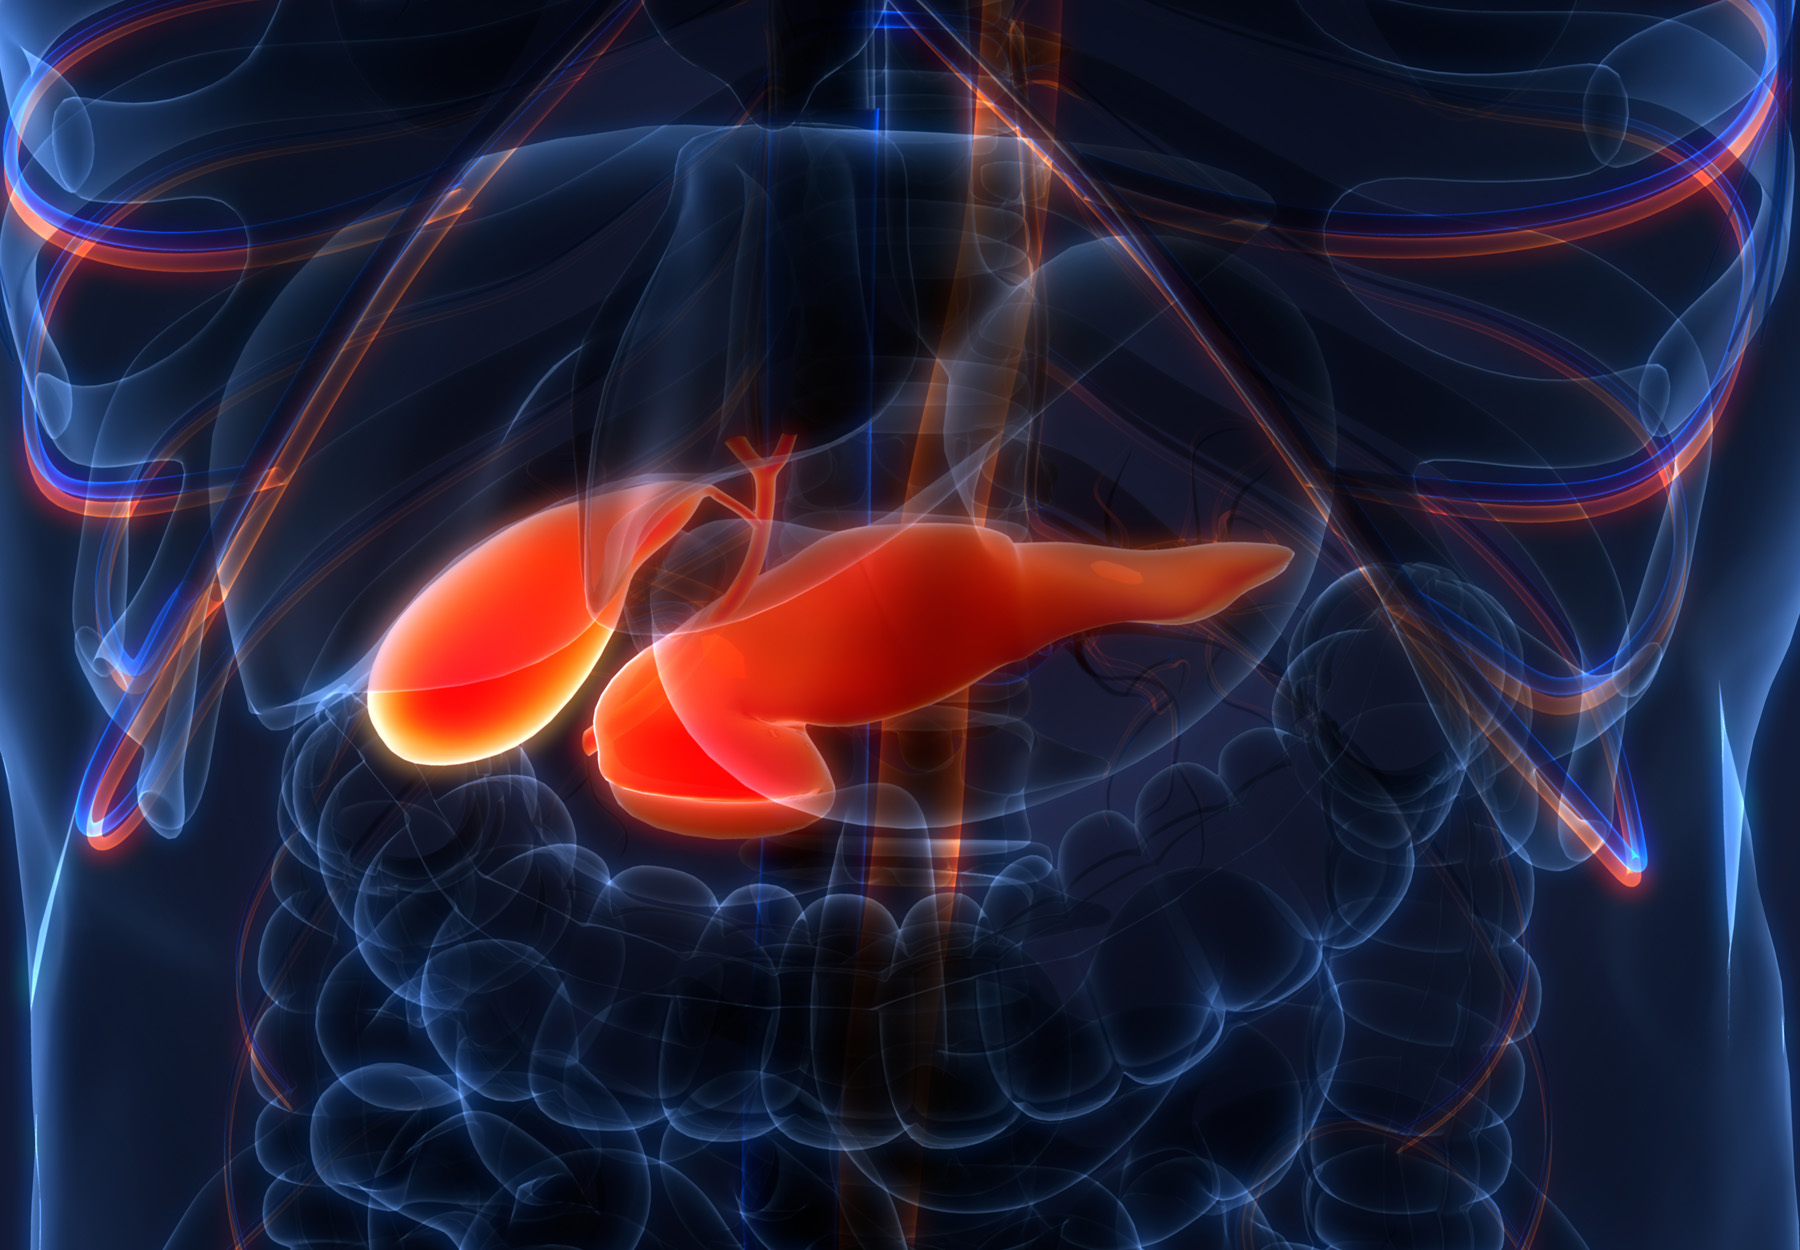 Computer illustration of the pancreas in the human body. The pancreas is shown in orange and the body in dark blue. Stock image.